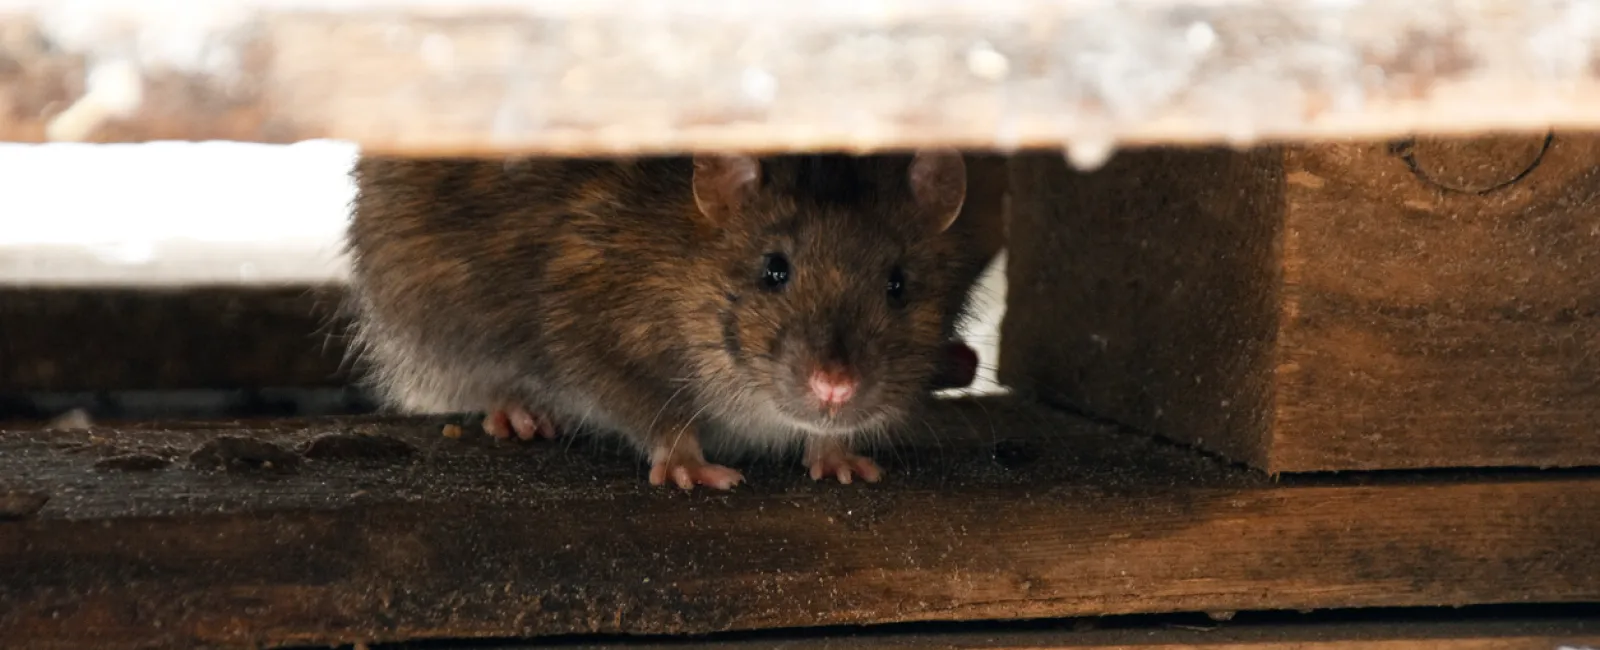 a rodent on a wooden surface